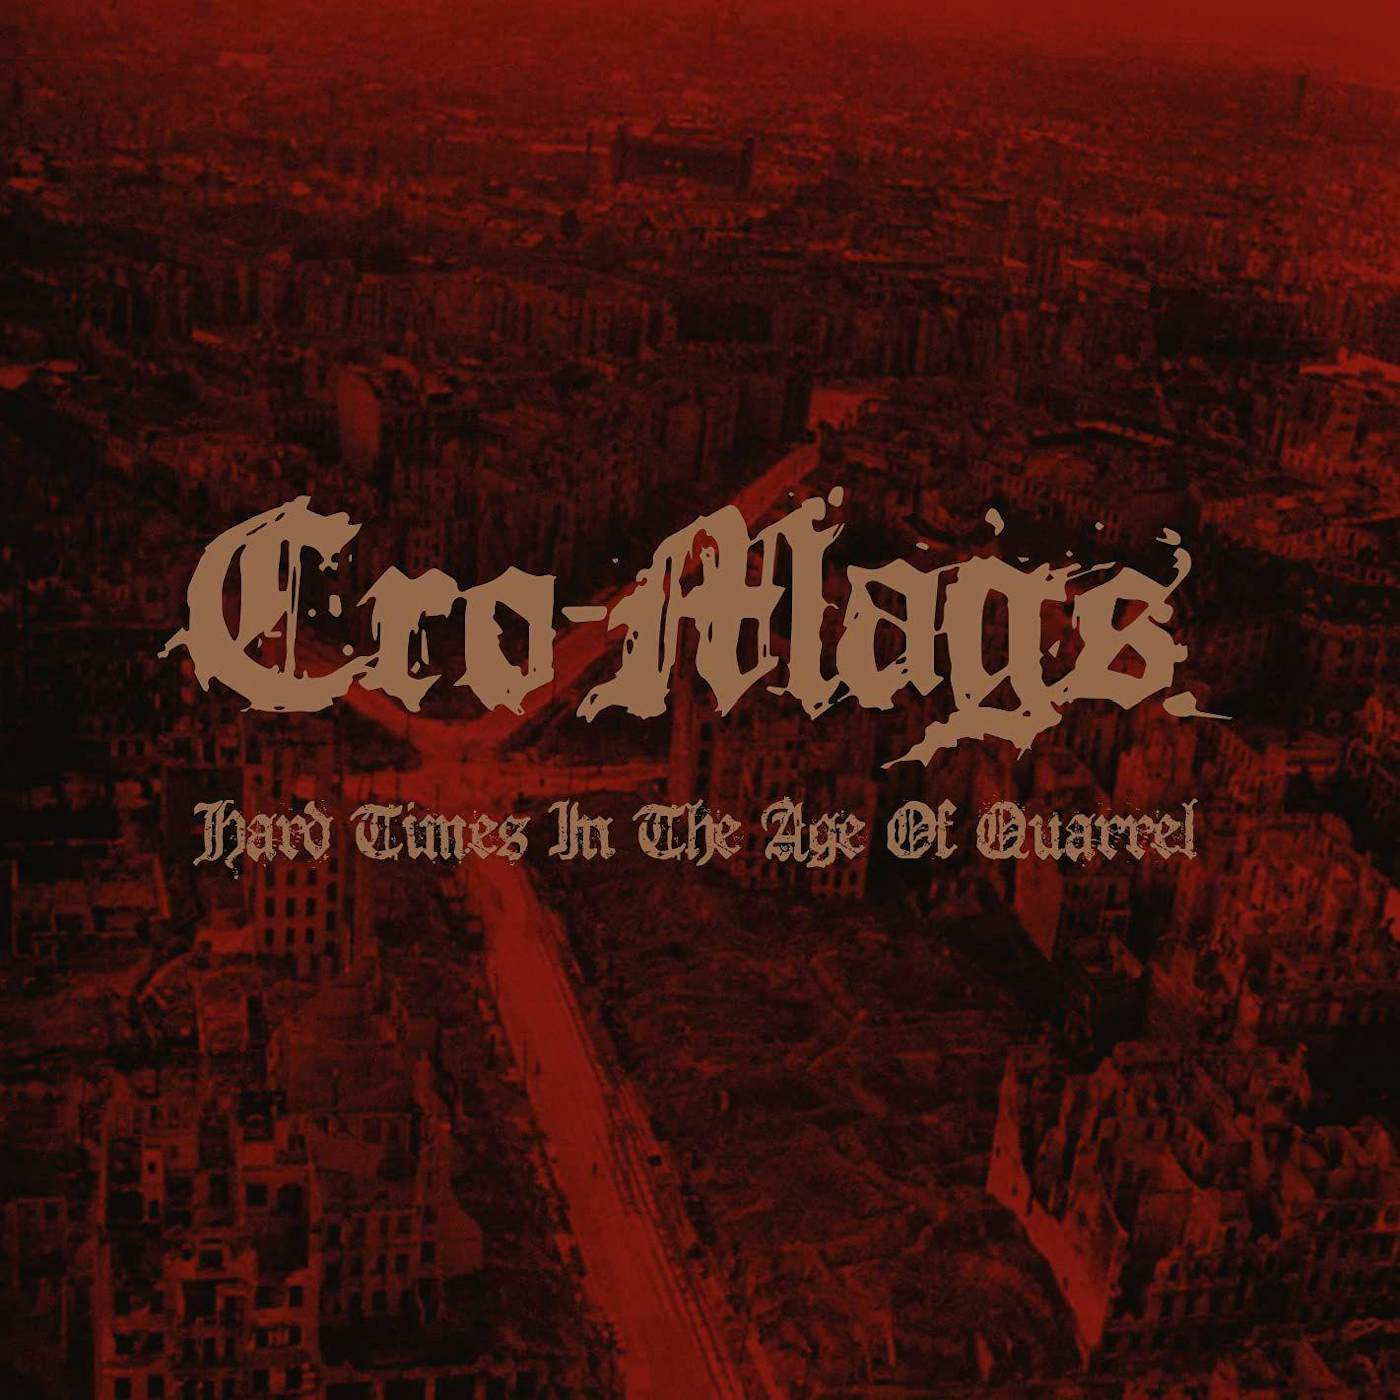 Cro-Mags Hard Times In The Age Of Quarrel: Vol 2 (Clear Vinyl Record/2lp)